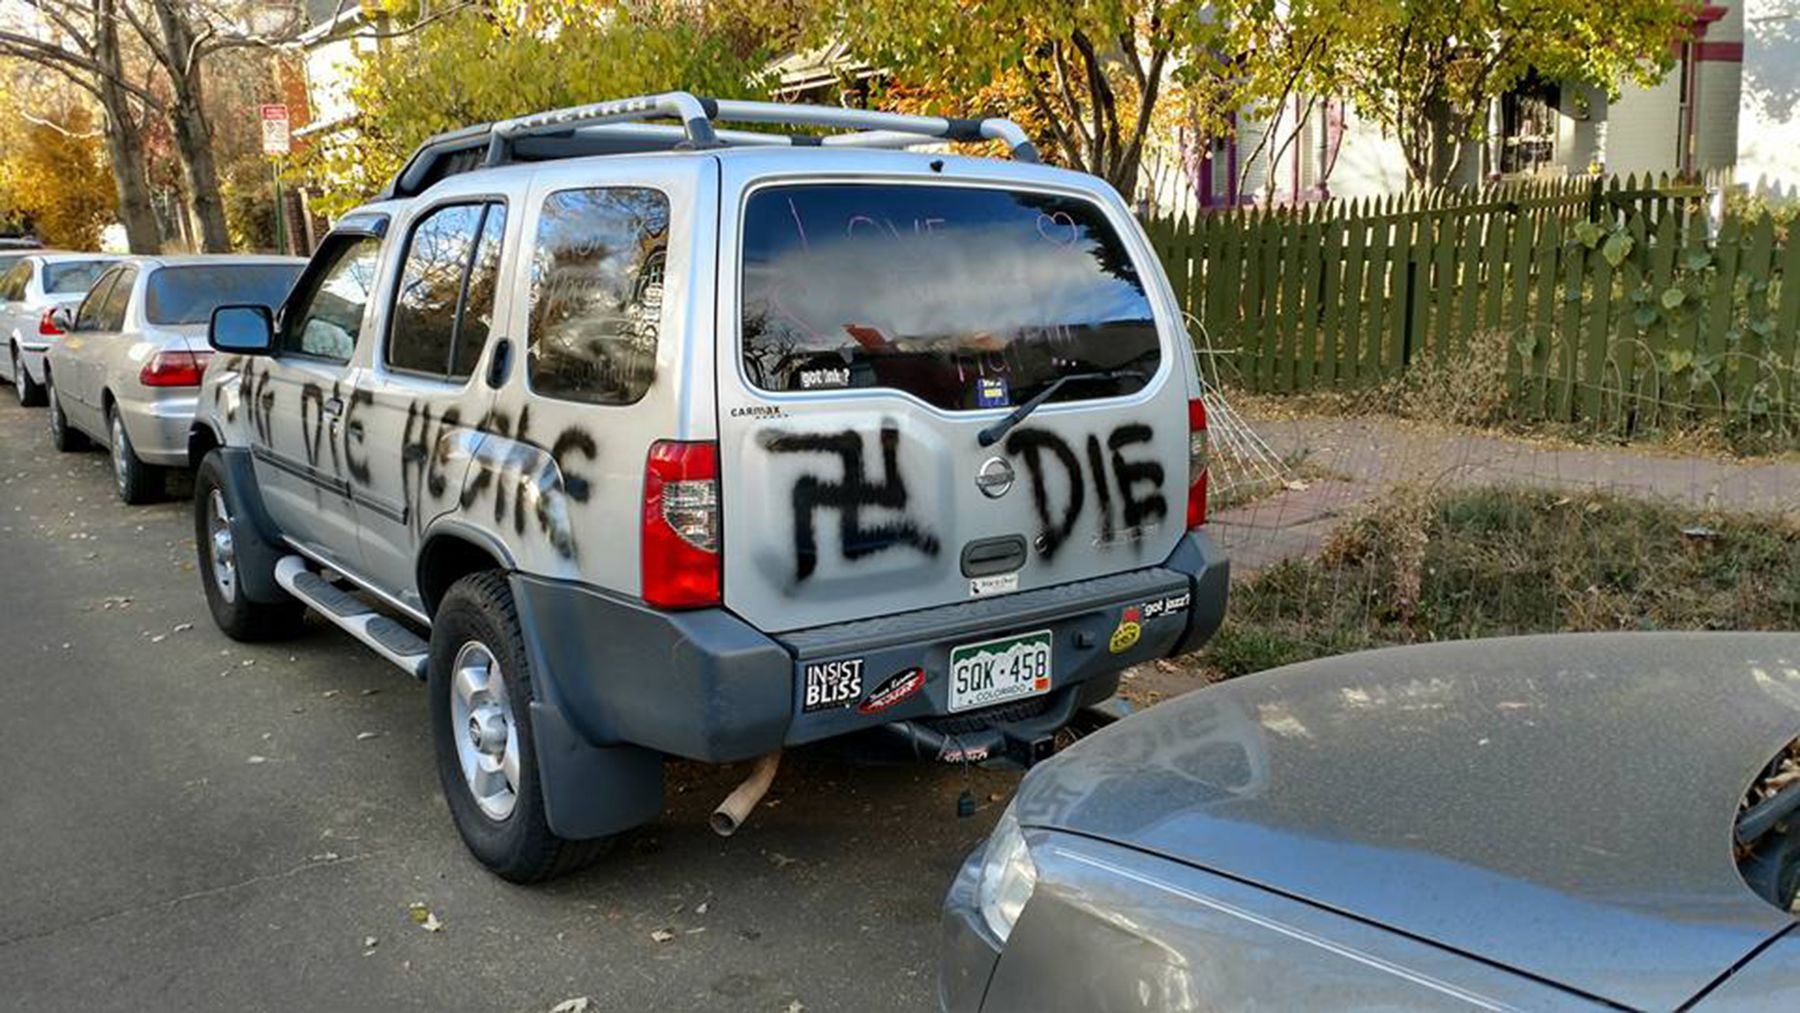 Caught on camera: Vandals spray paint cars, homes, church bus on Indy's  west side